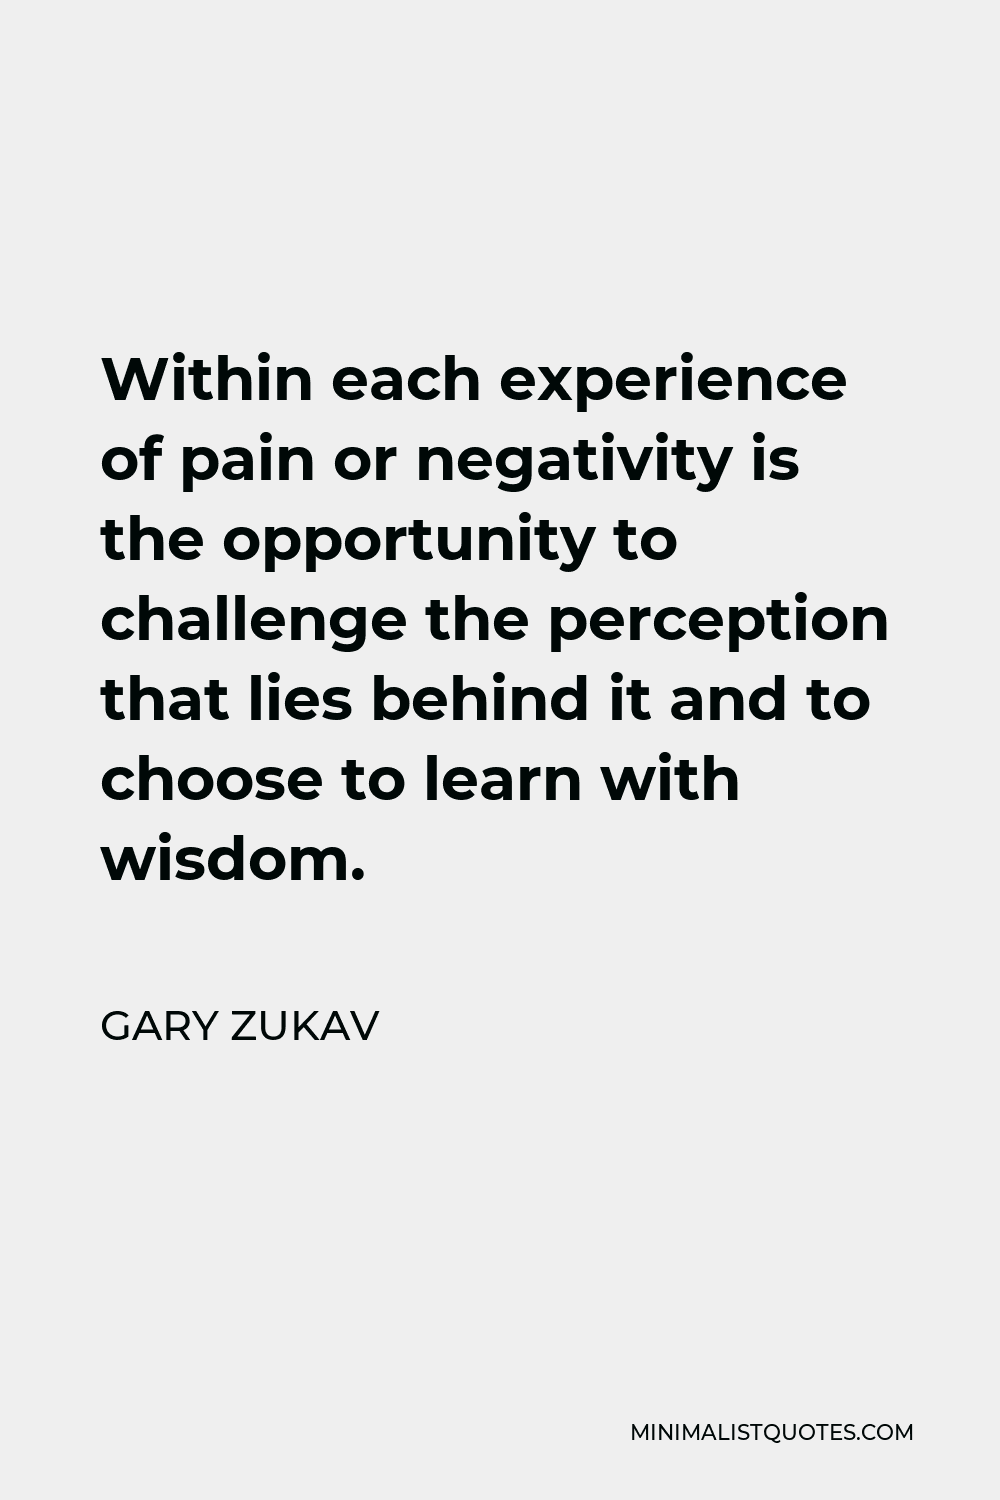 Gary Zukav Quote - Within each experience of pain or negativity is the opportunity to challenge the perception that lies behind it and to choose to learn with wisdom.